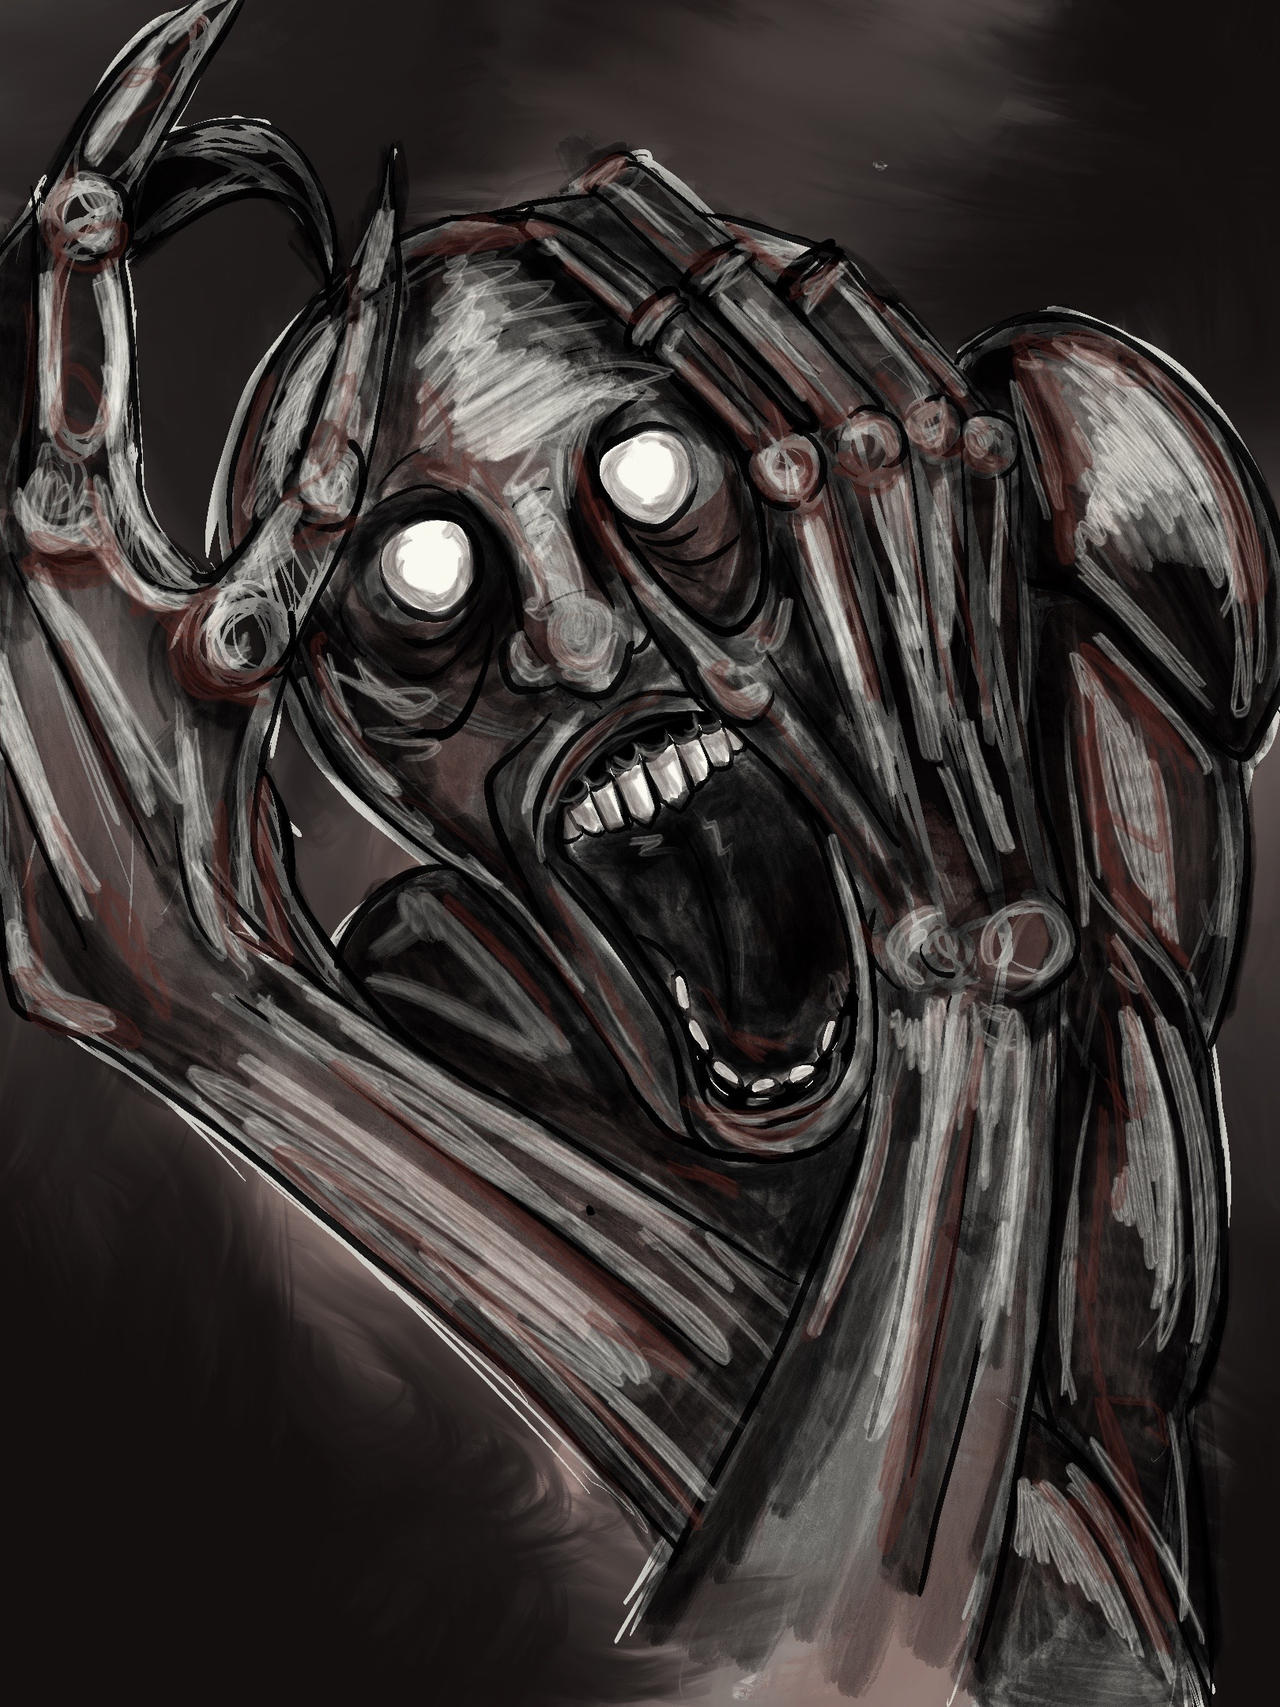 digital painting of scp-096 by marinellolea on DeviantArt